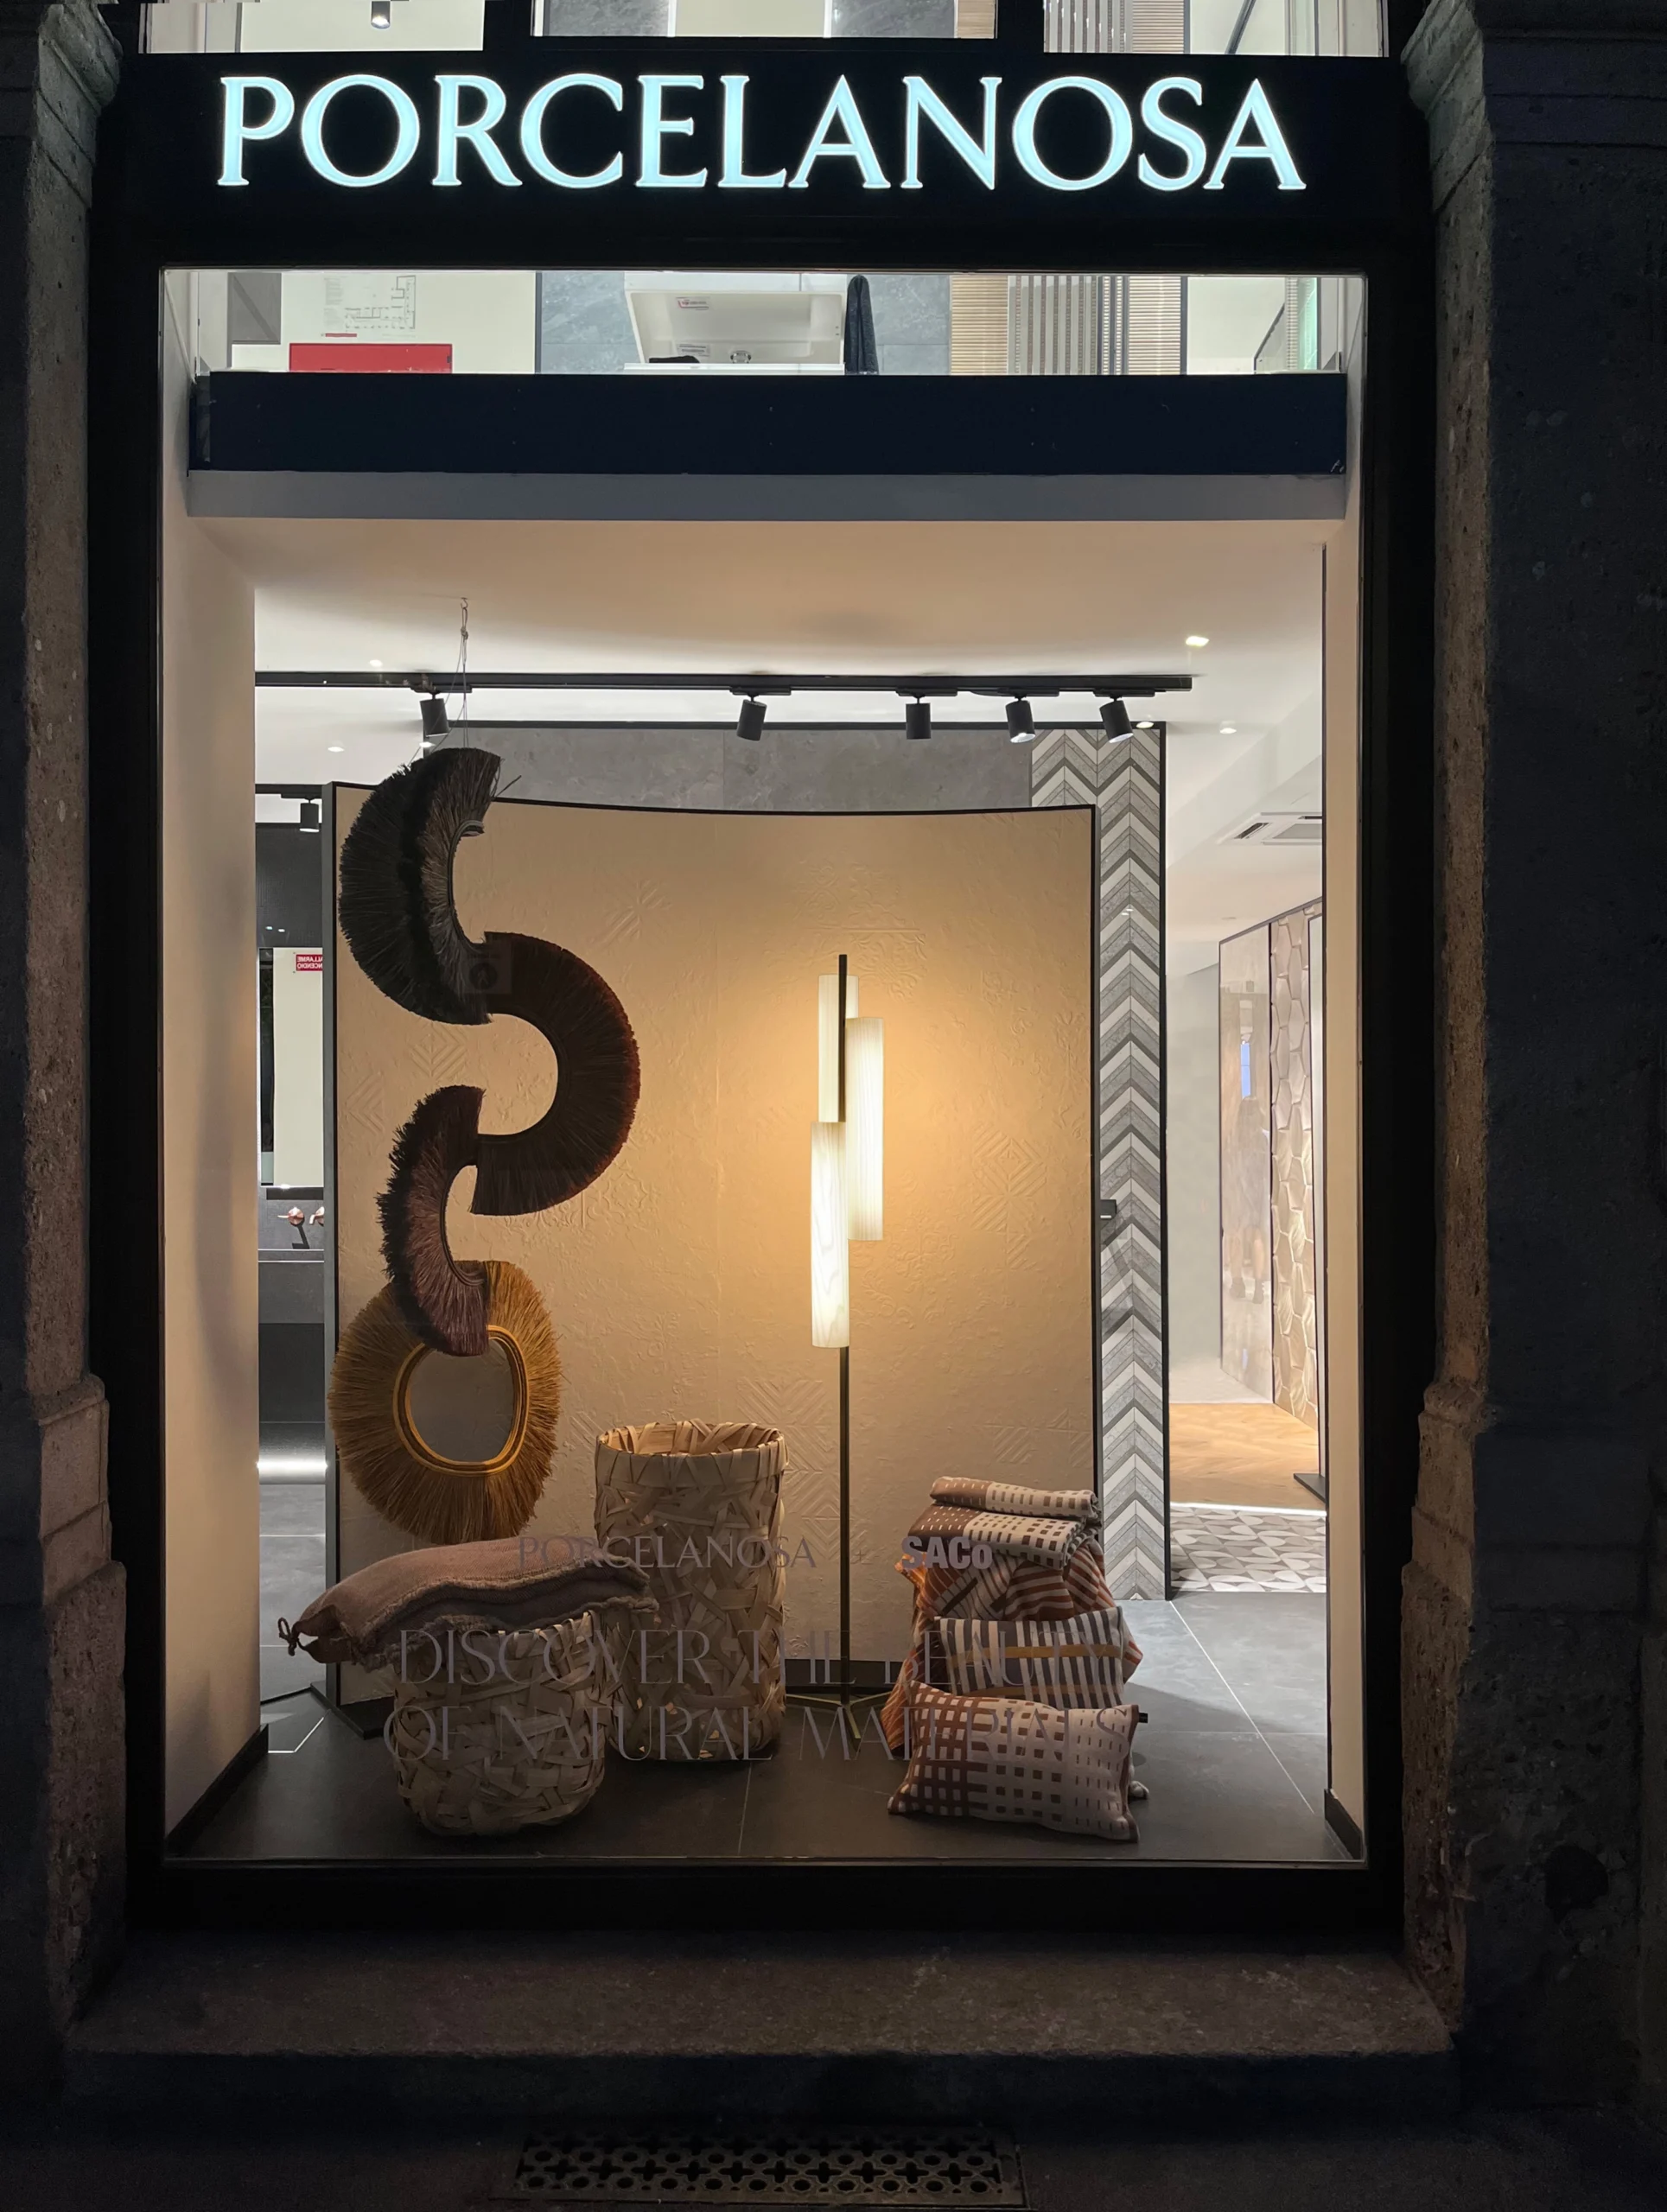 The photo frames a display case in the Porcelanosa shop where you can see the "Blacknote Triplet" floor lamp designed by Ramón Esteve together with other designs by collaborators in the exhibition. 